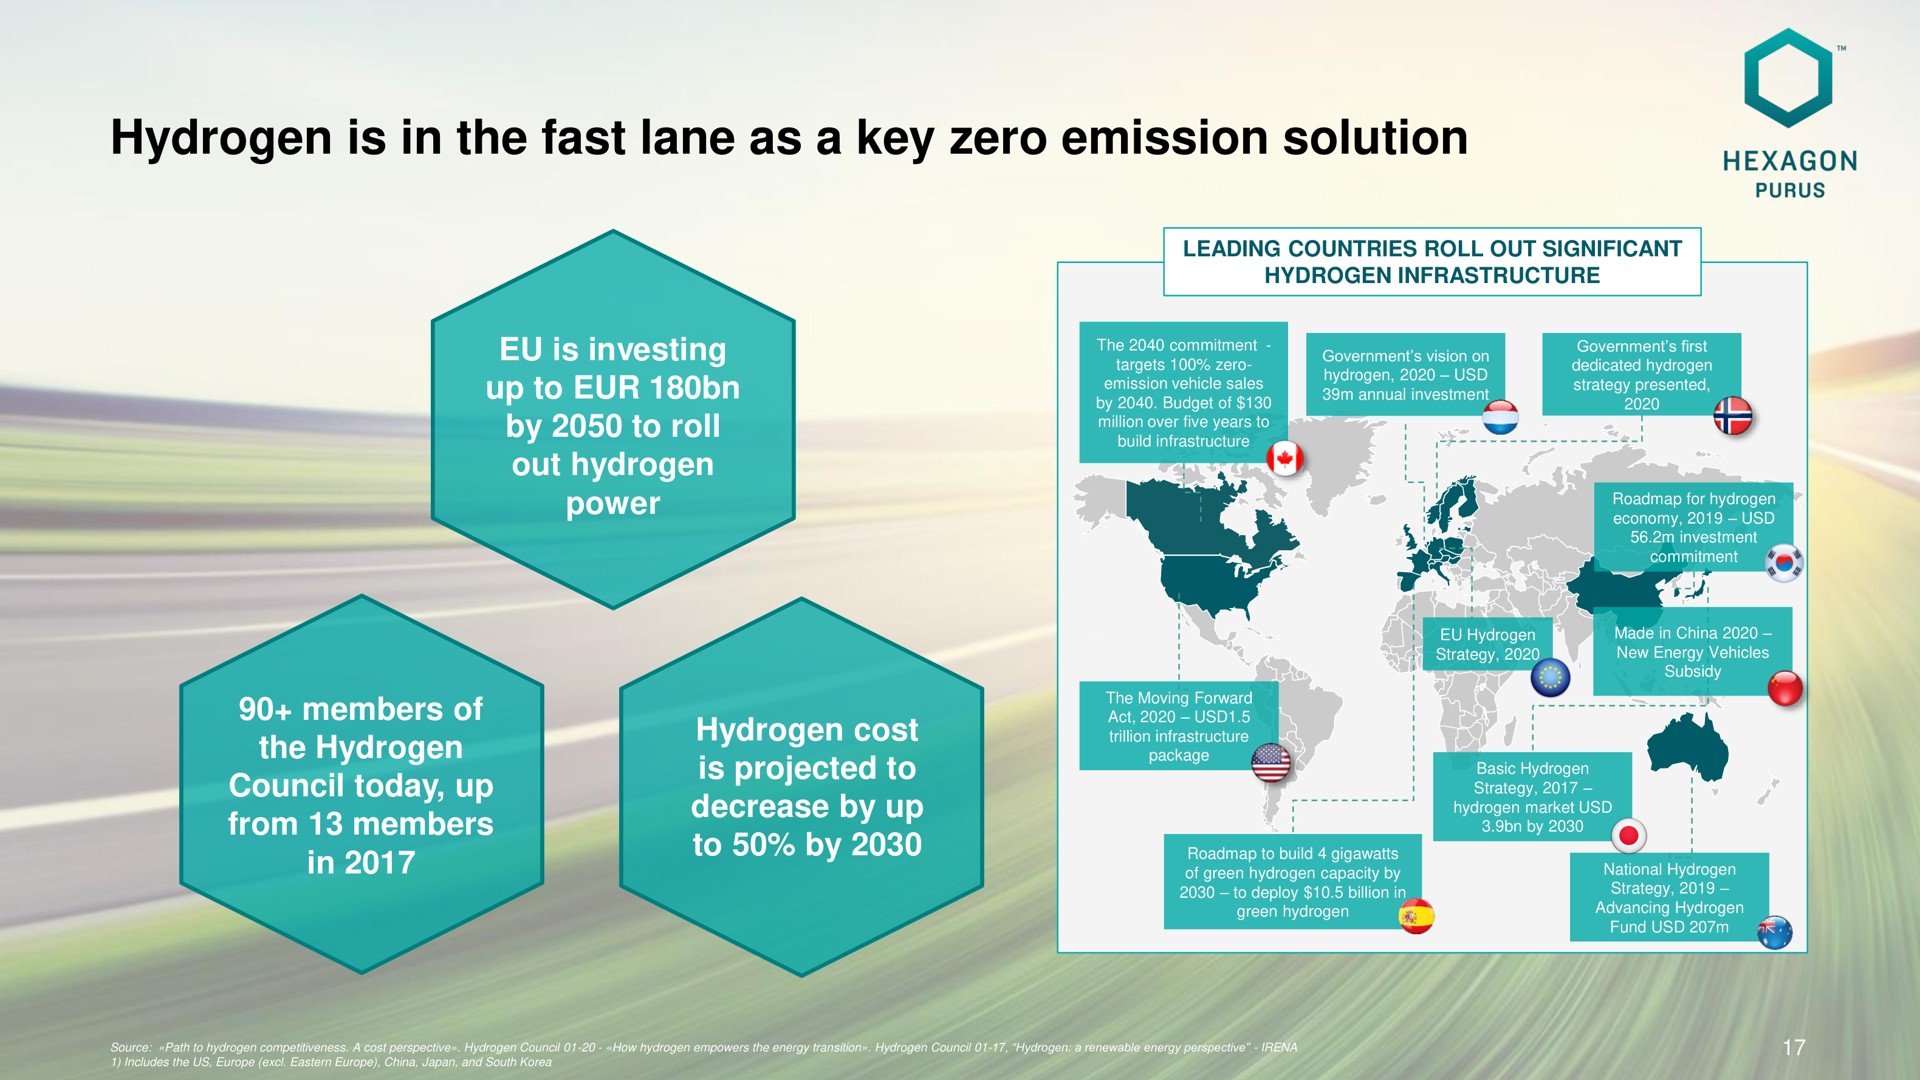 hydrogen is in the fast lane as a key zero emission solution | Hexagon Purus